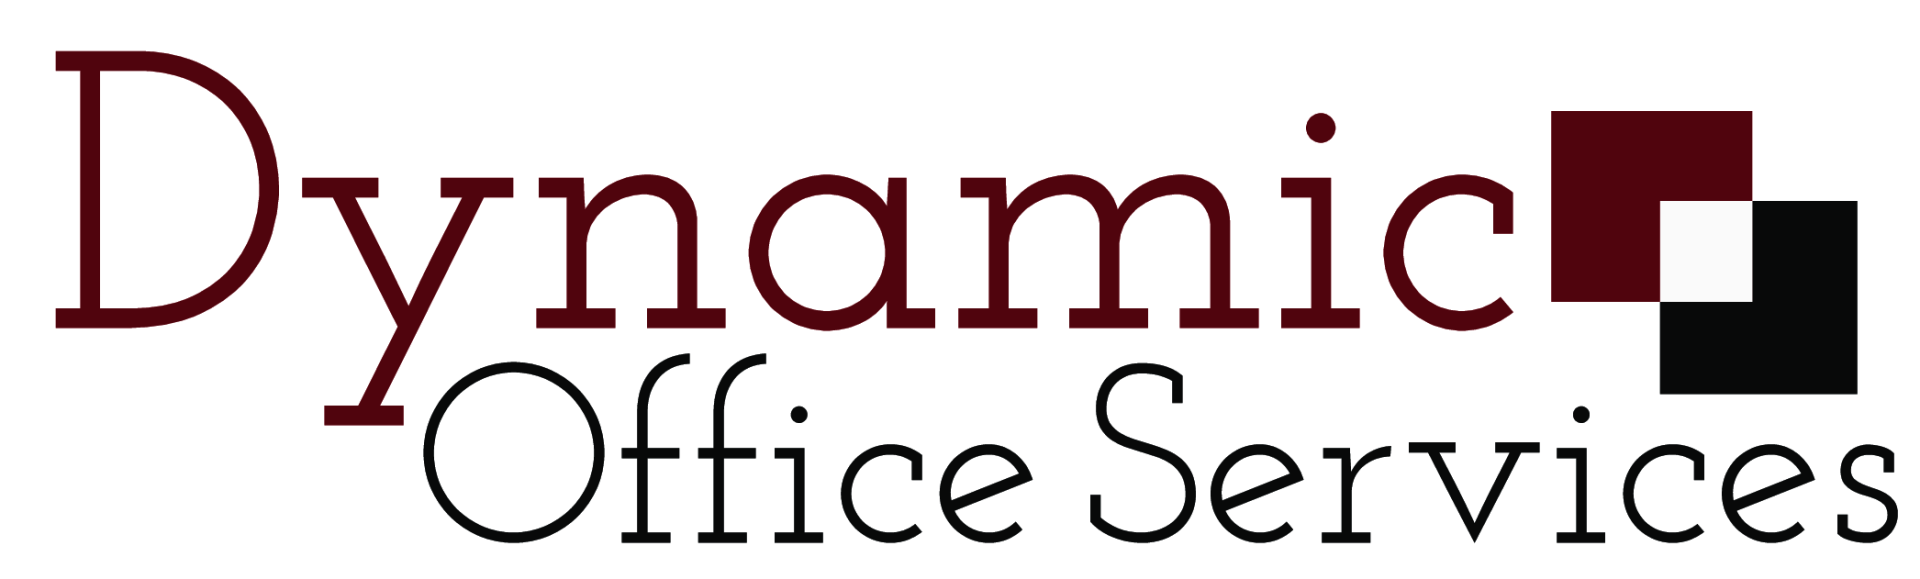 Dynamic Office Services